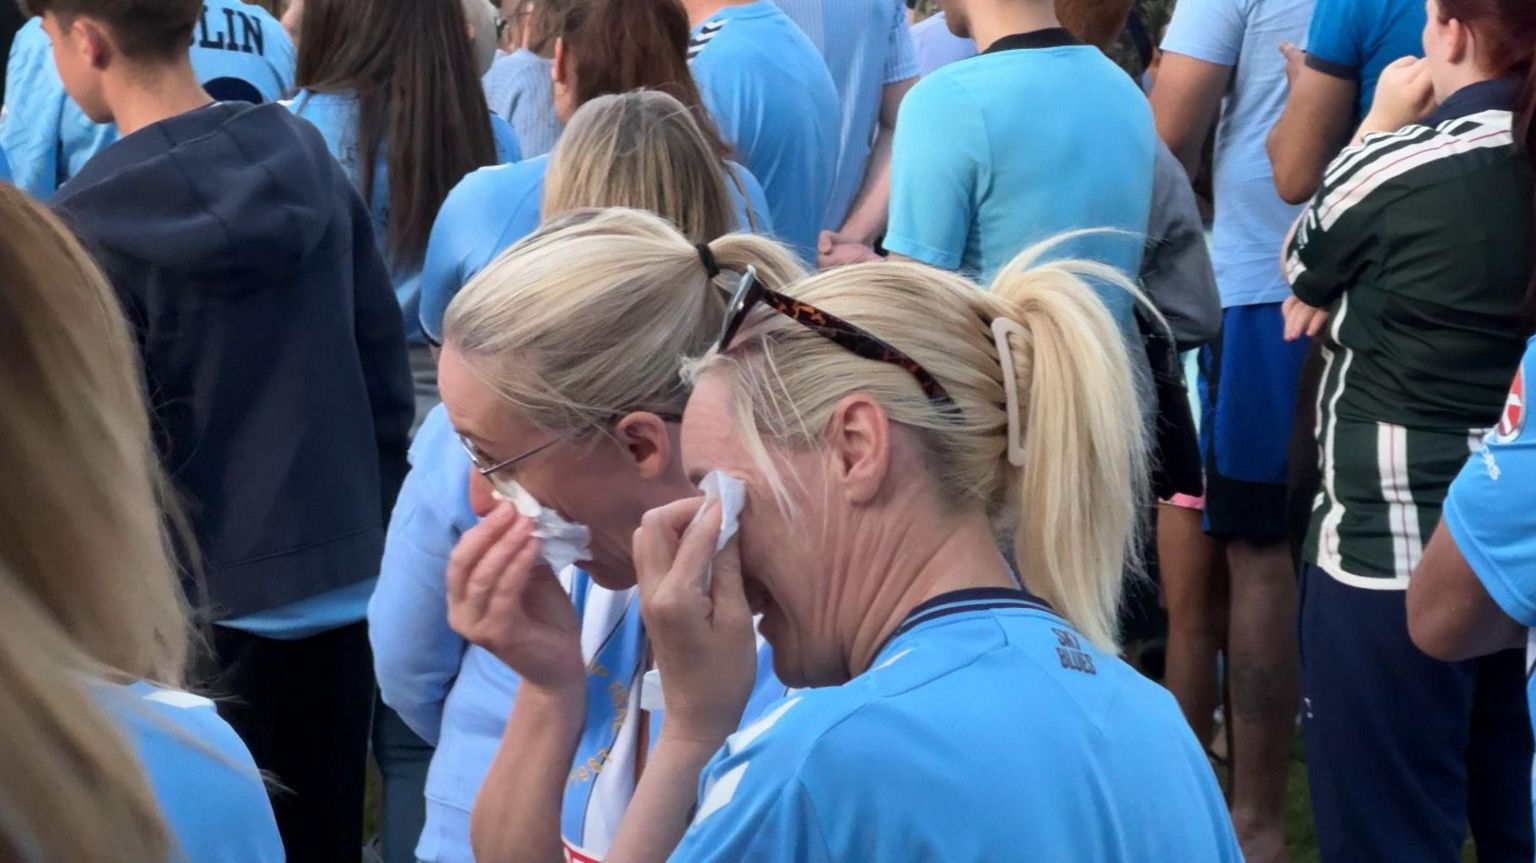 A crowd of people, many wearing sky blue colours, with two women wiping away tears in the foreground